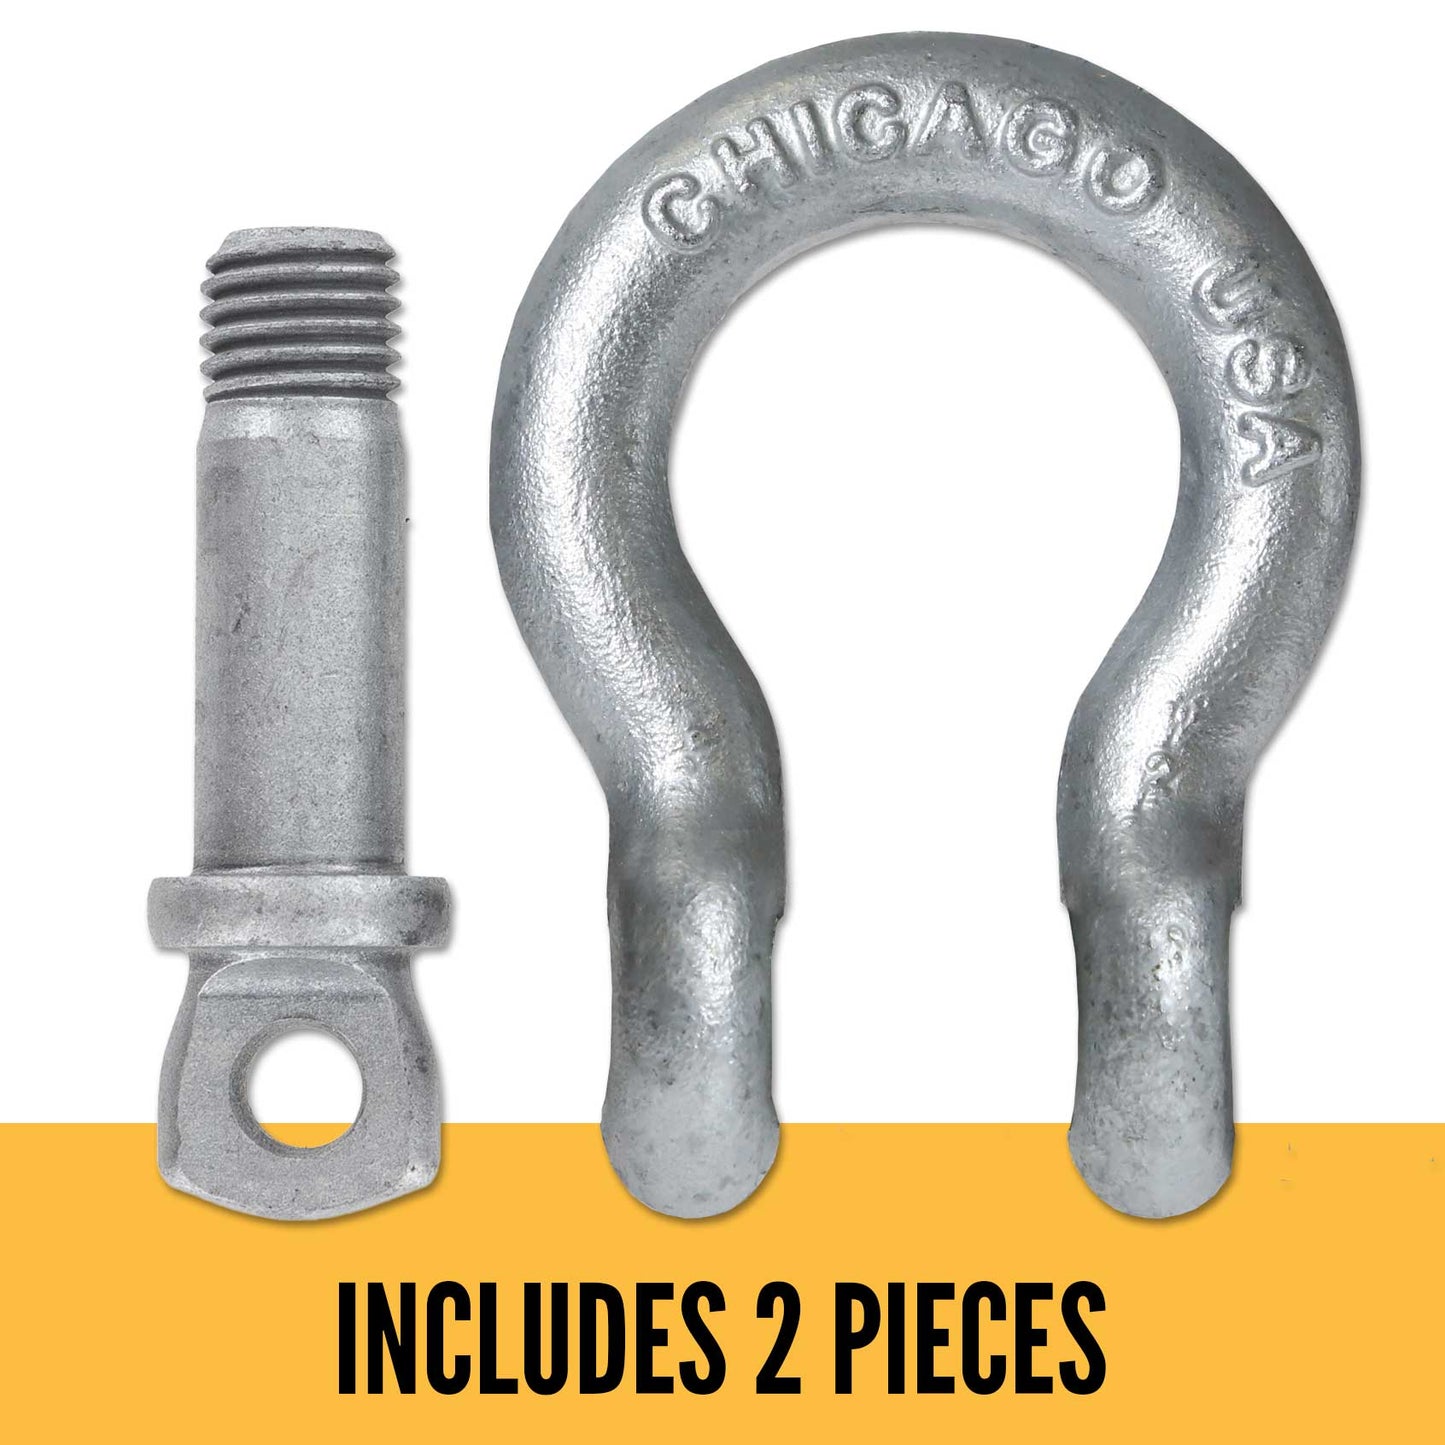 Screw Pin Anchor Shackle - Chicago Hardware - 3/4" Galvanized Steel - 4.75 Ton parts of a shackle